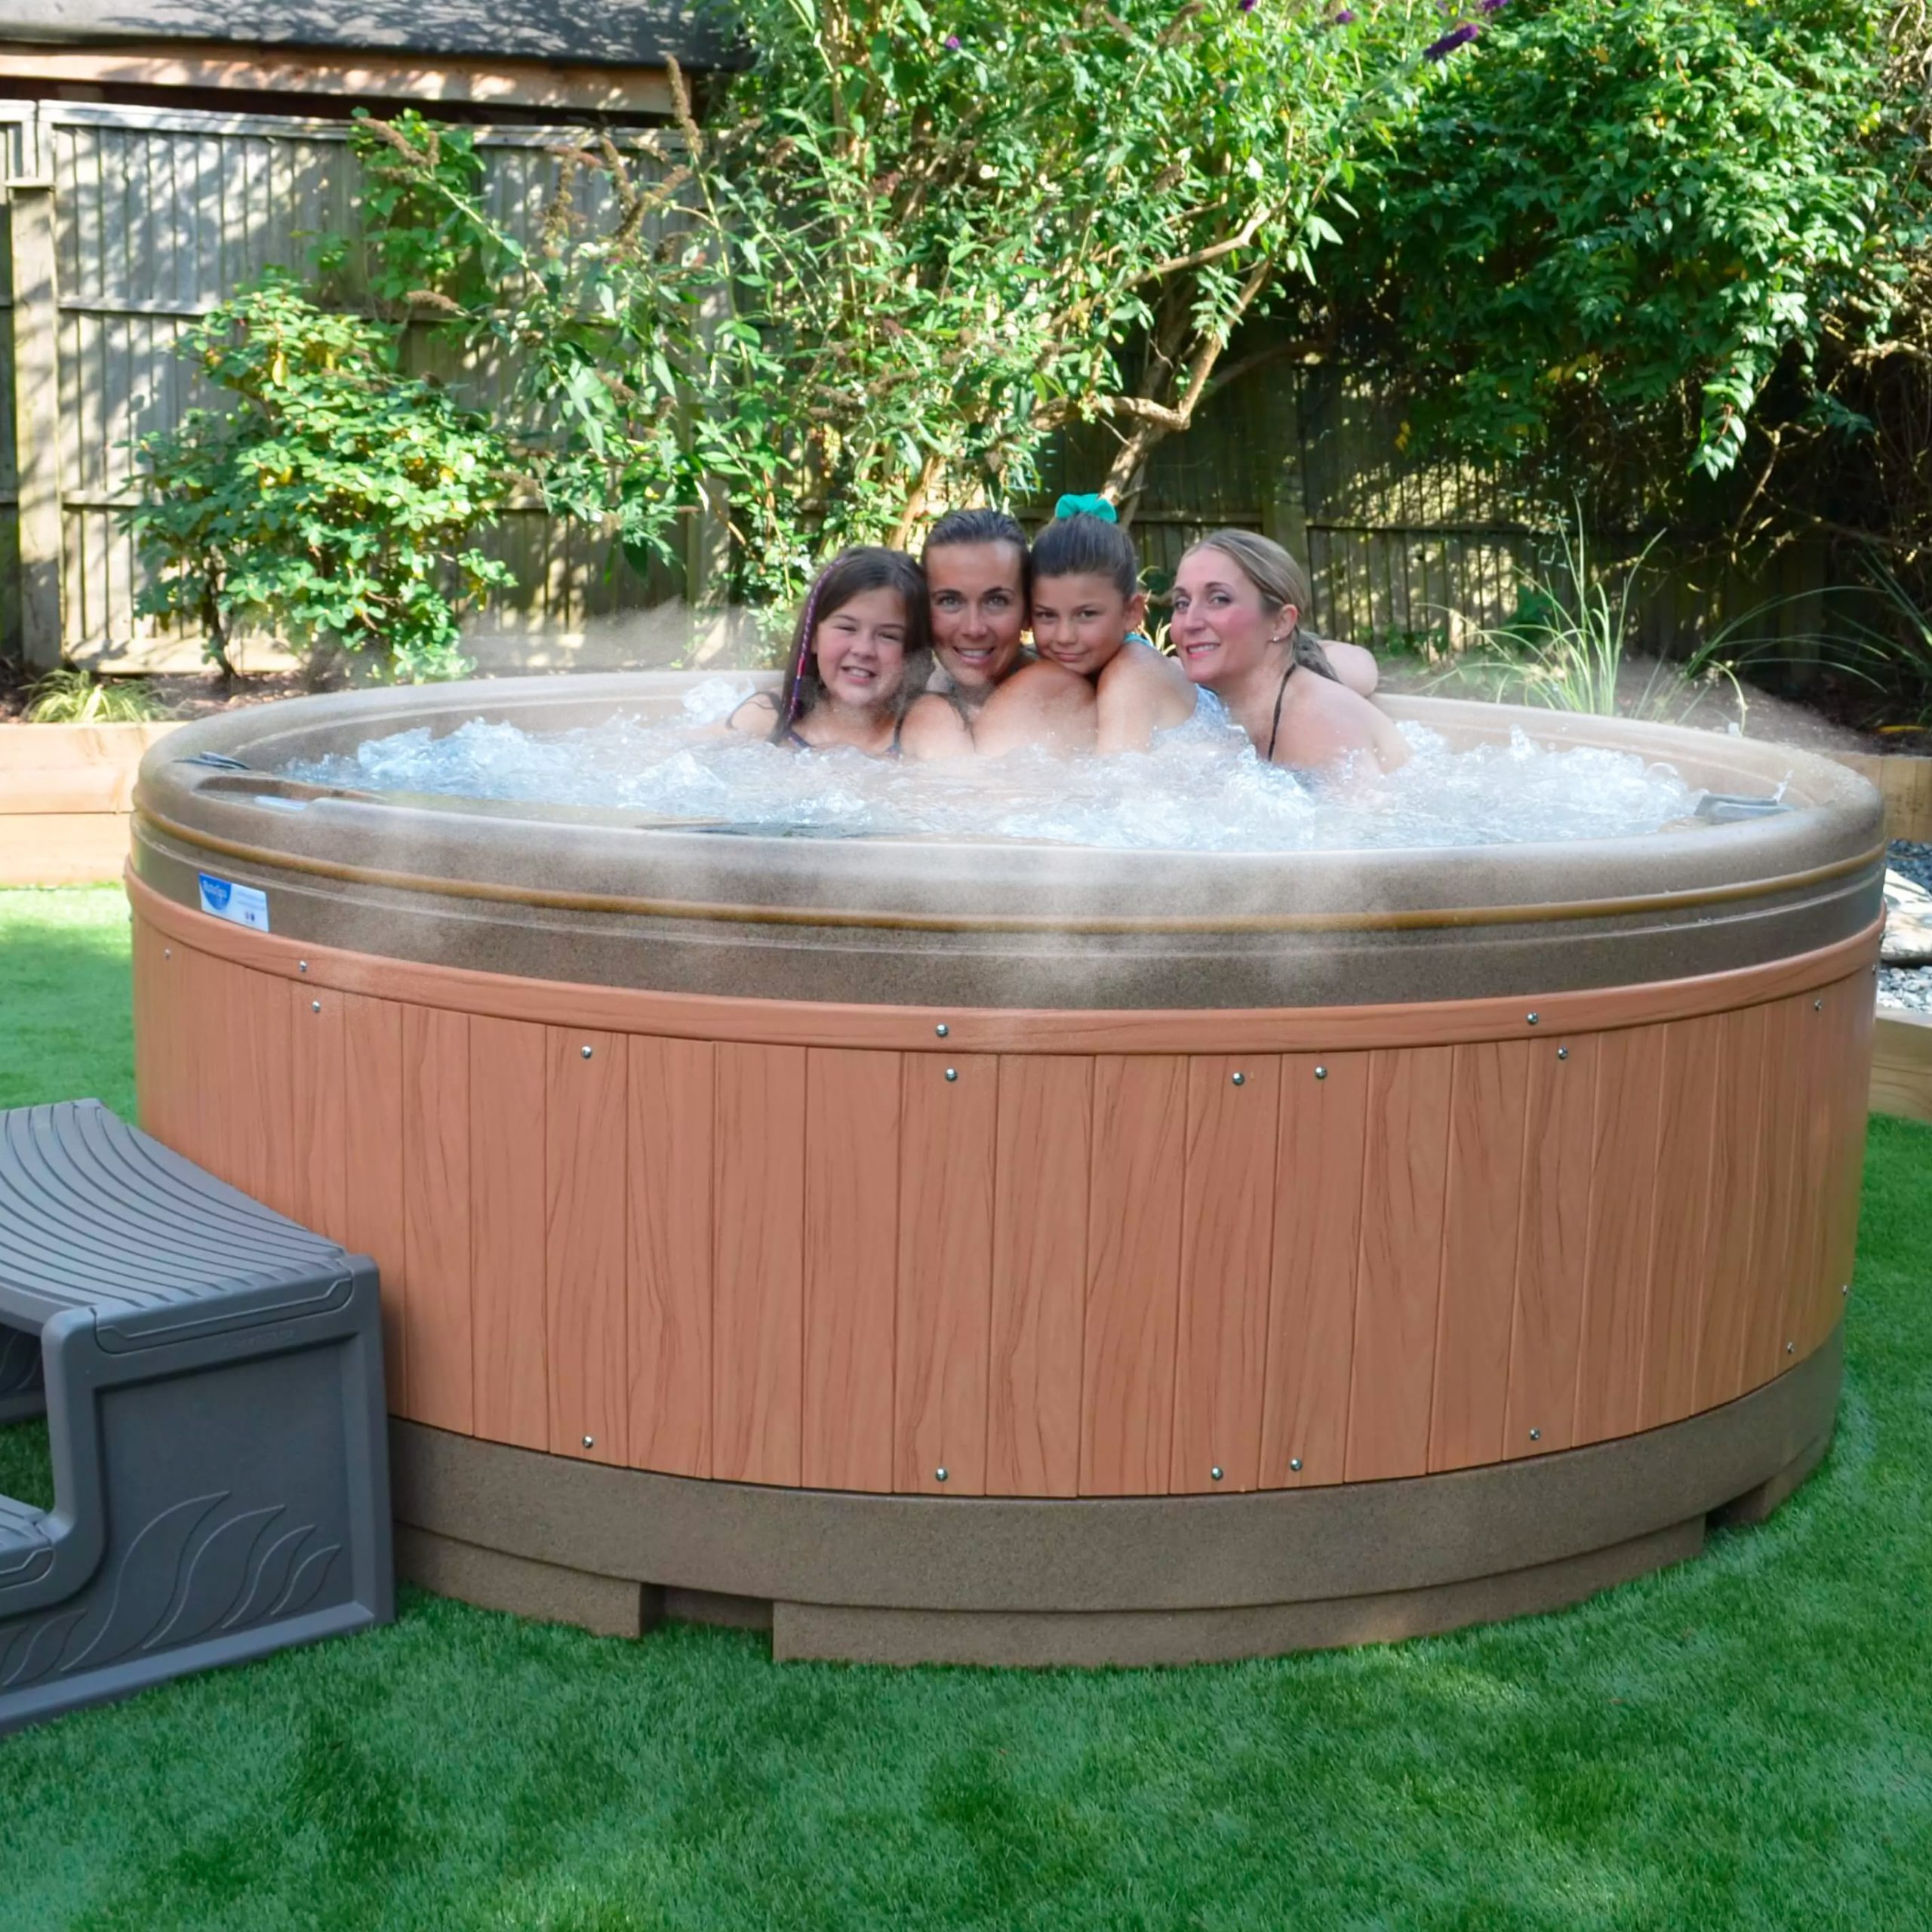 Party Hire Stuff - Hot Tub Hire with Balloons in Water